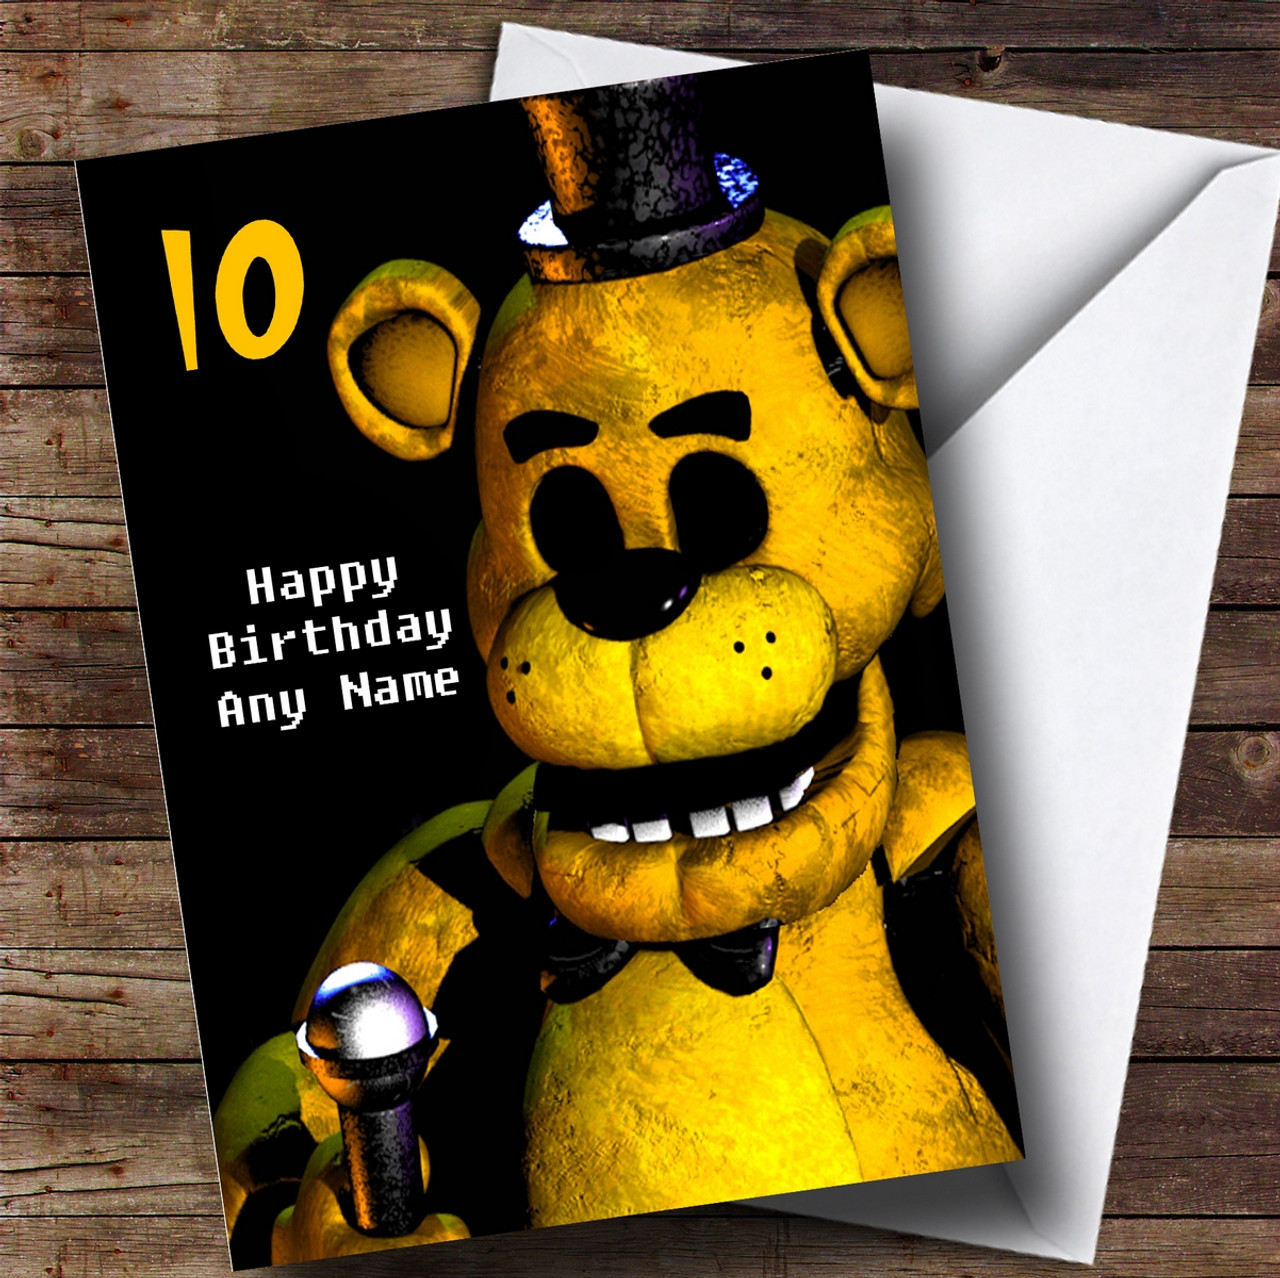 Personalised Fnaf Five Nights At Freddy S Golden Freddy Children S Birthday Card The Card Zoo - fnaf zoo roblox